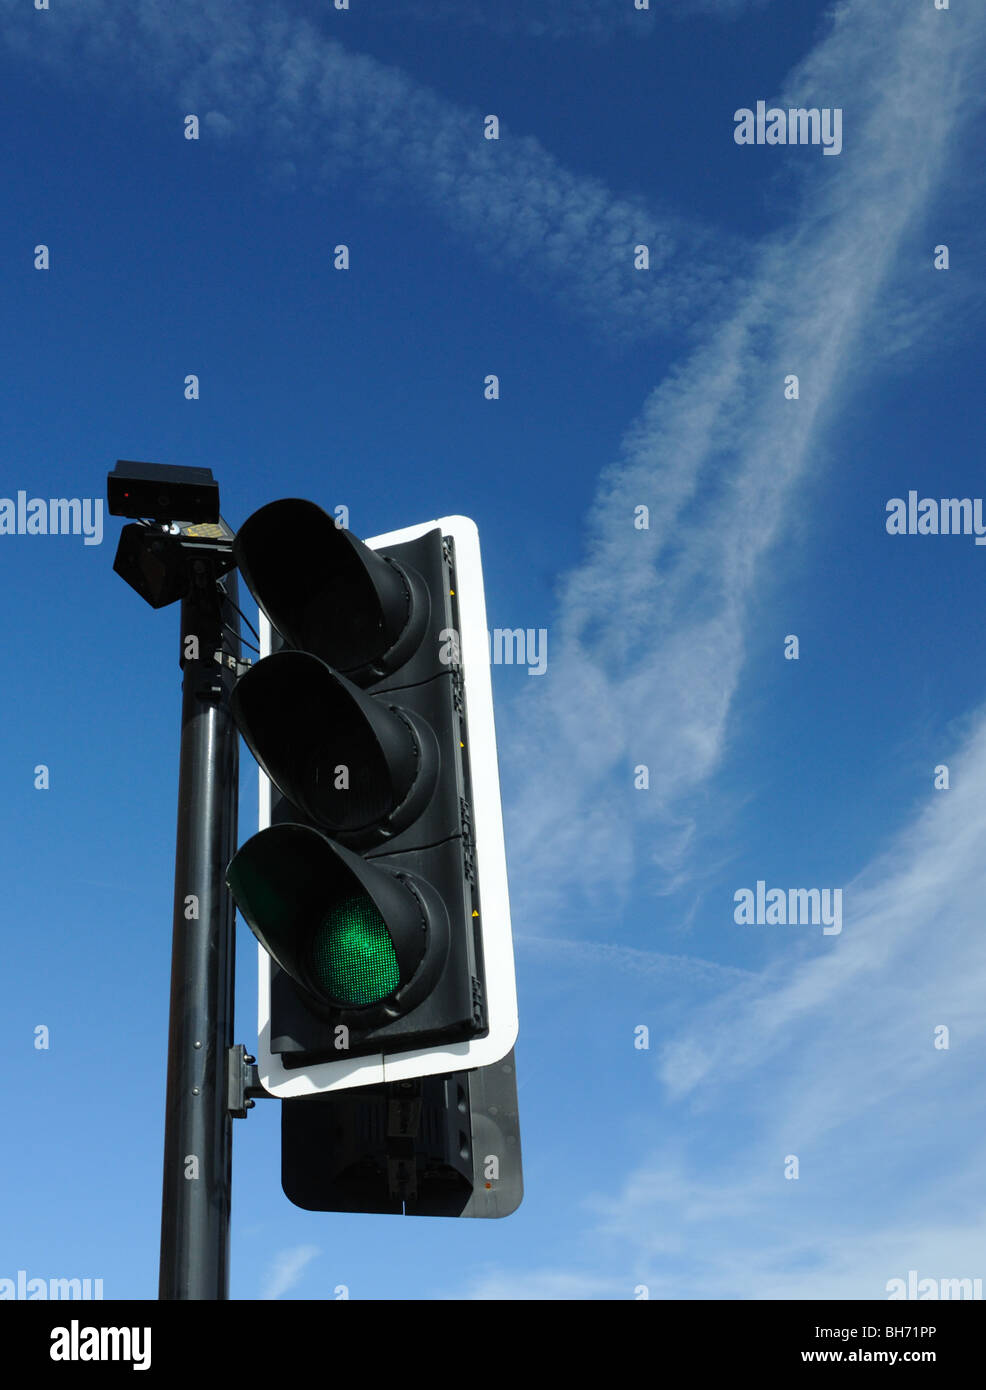 Traffic light set on green with dramatic blue sky with jet contrails behind Stock Photo